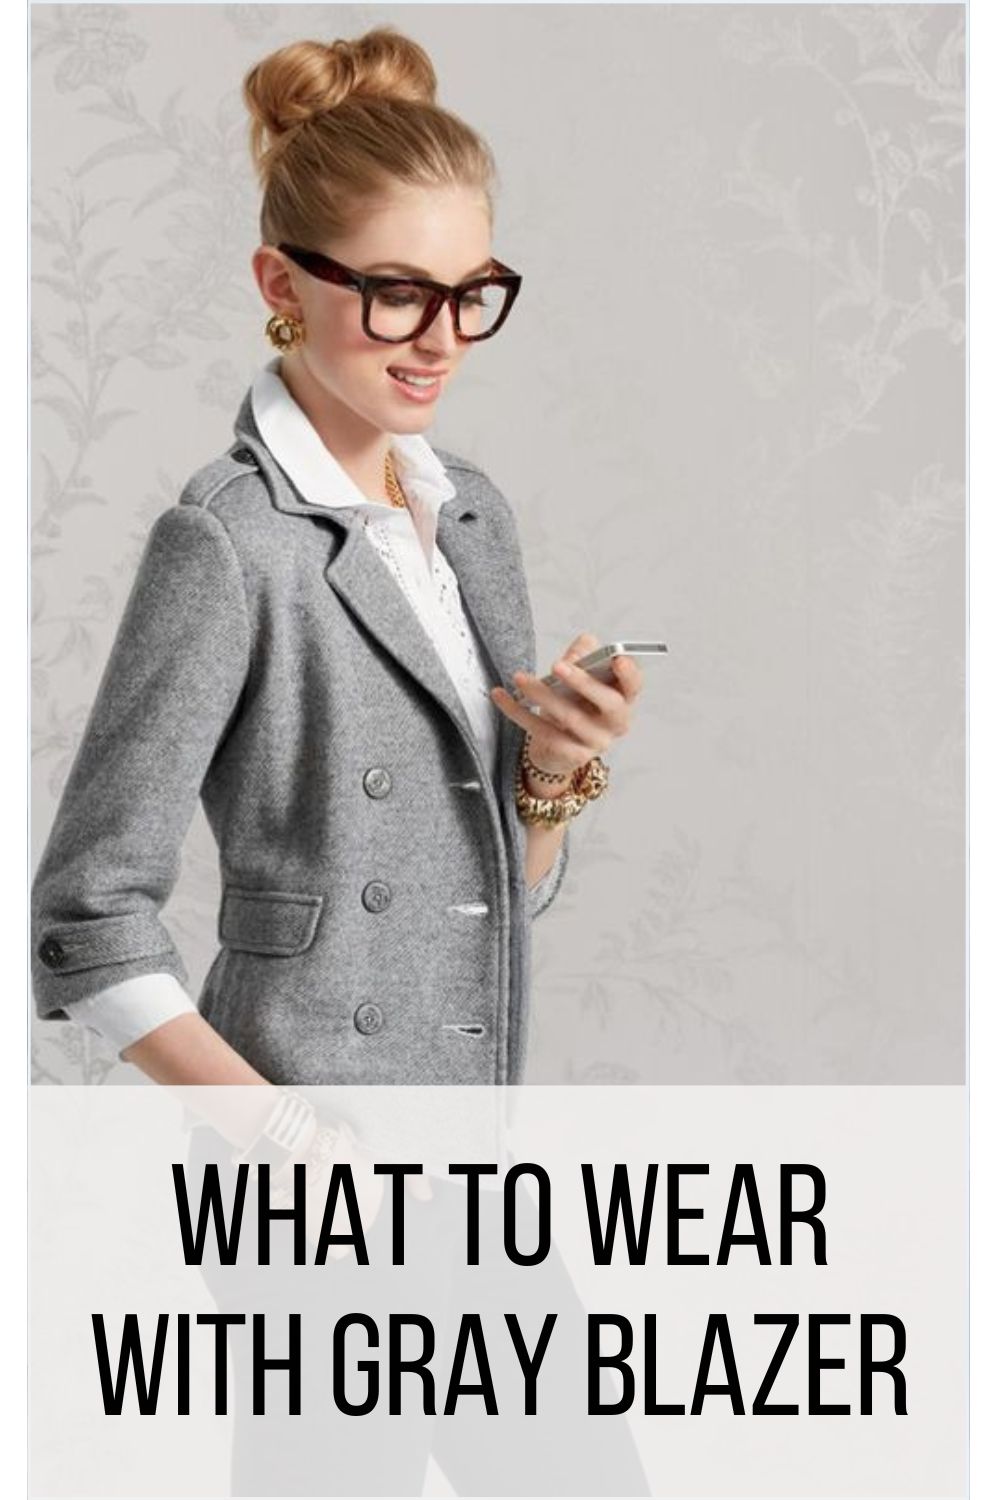 What To Wear With Gray Blazer